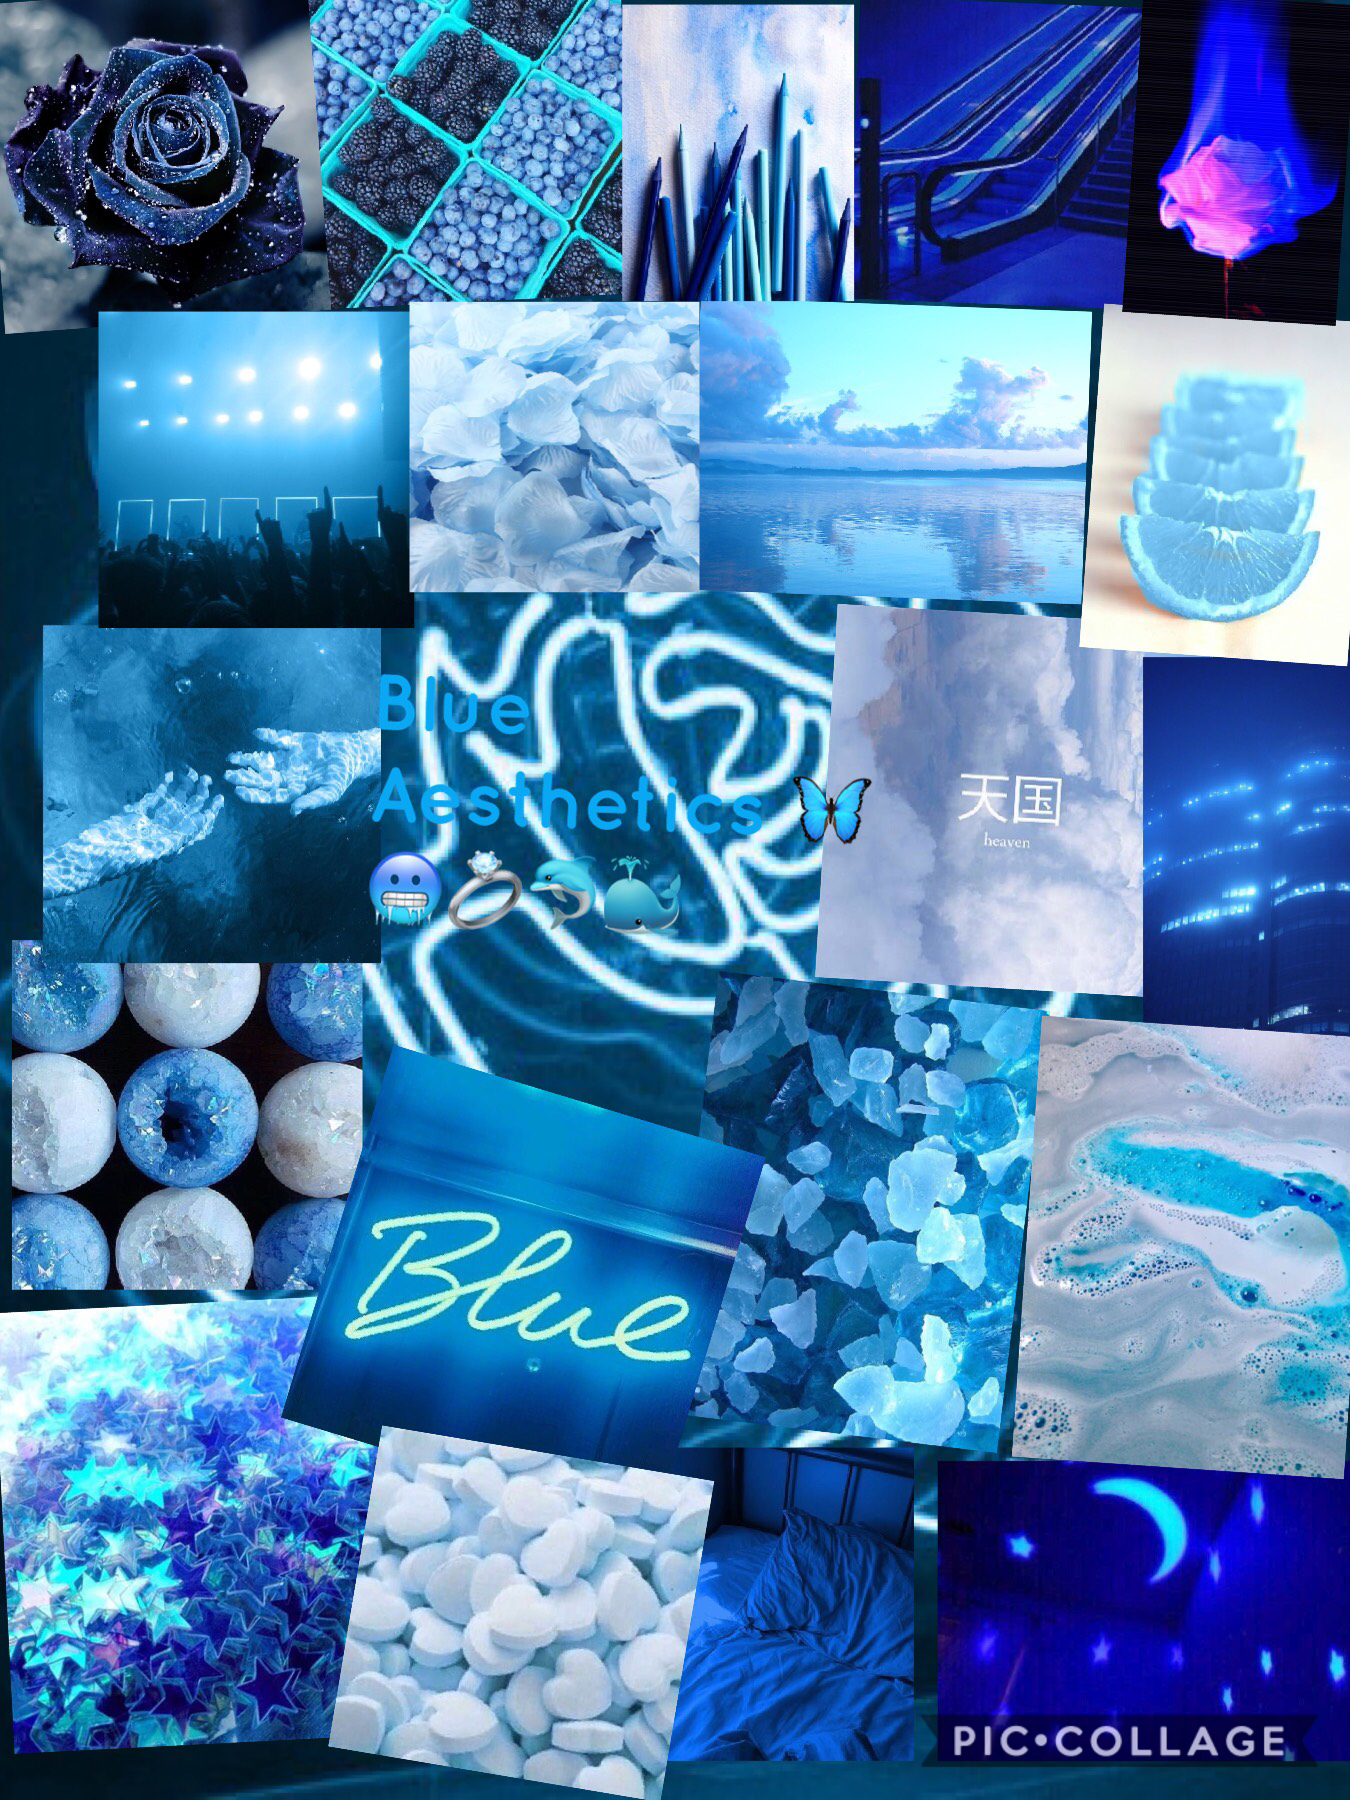 🐬🐳🥶💍🦋TaP🦋💍🥶🐳🐬
Busy. Blue. AESTHETICS🐳🥶🦋💍🐬